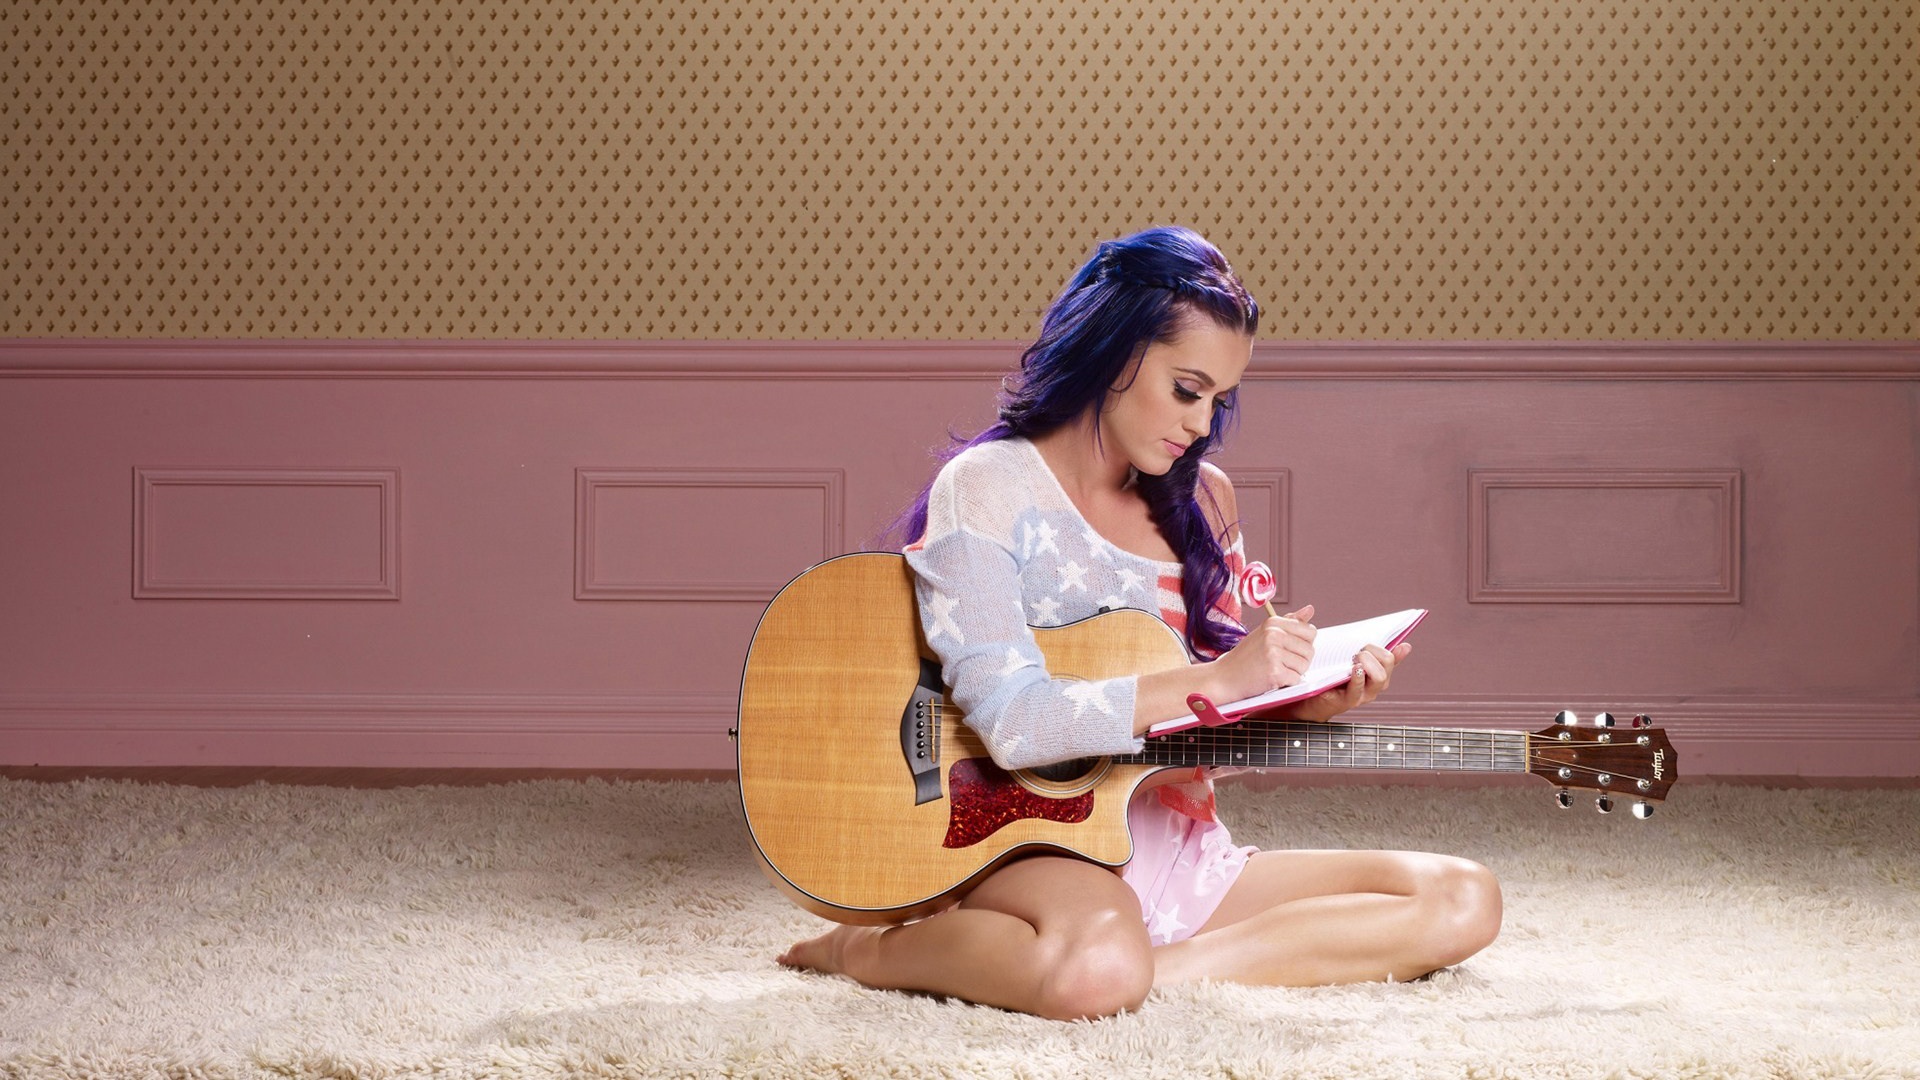 Katy Perry Wallpapers Roar 1080p Widescreen,, - Katy Perry With Guitar - HD Wallpaper 